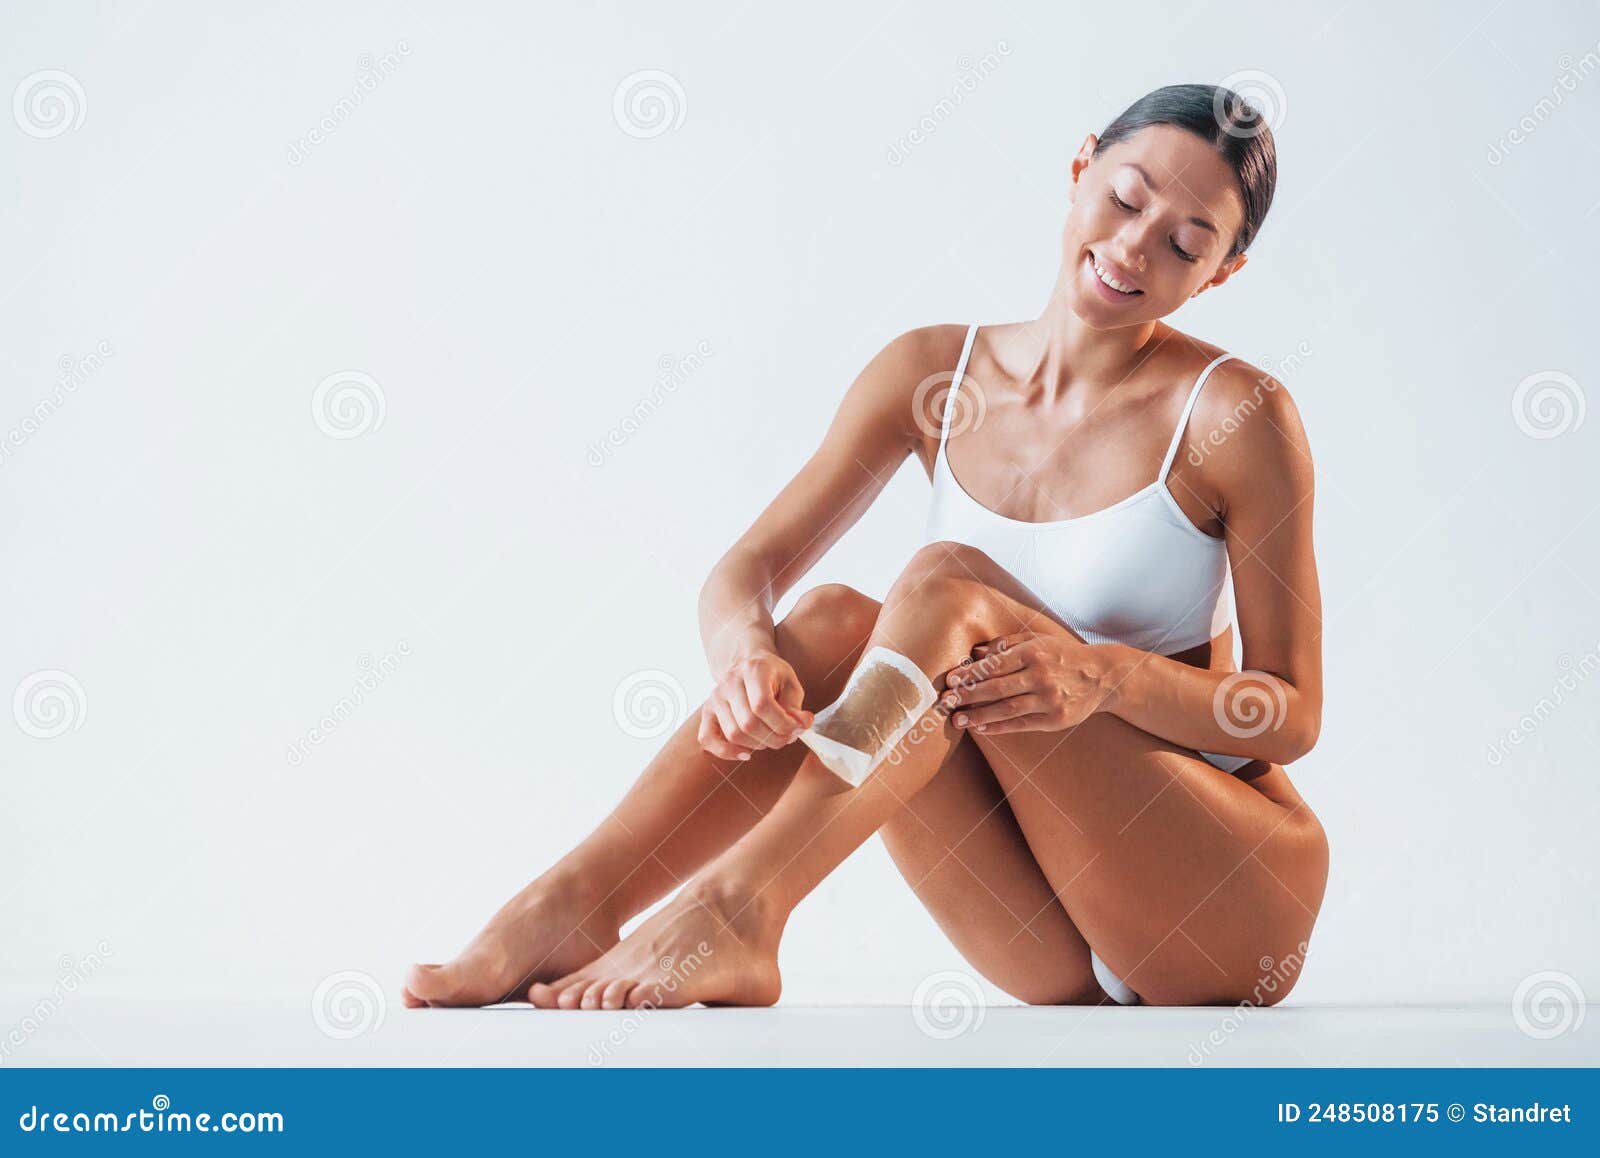 Removing Hair that on Leg. Beautiful Woman with Slim Body in Underwear is  in the Studio Stock Image - Image of athletic, model: 248508175